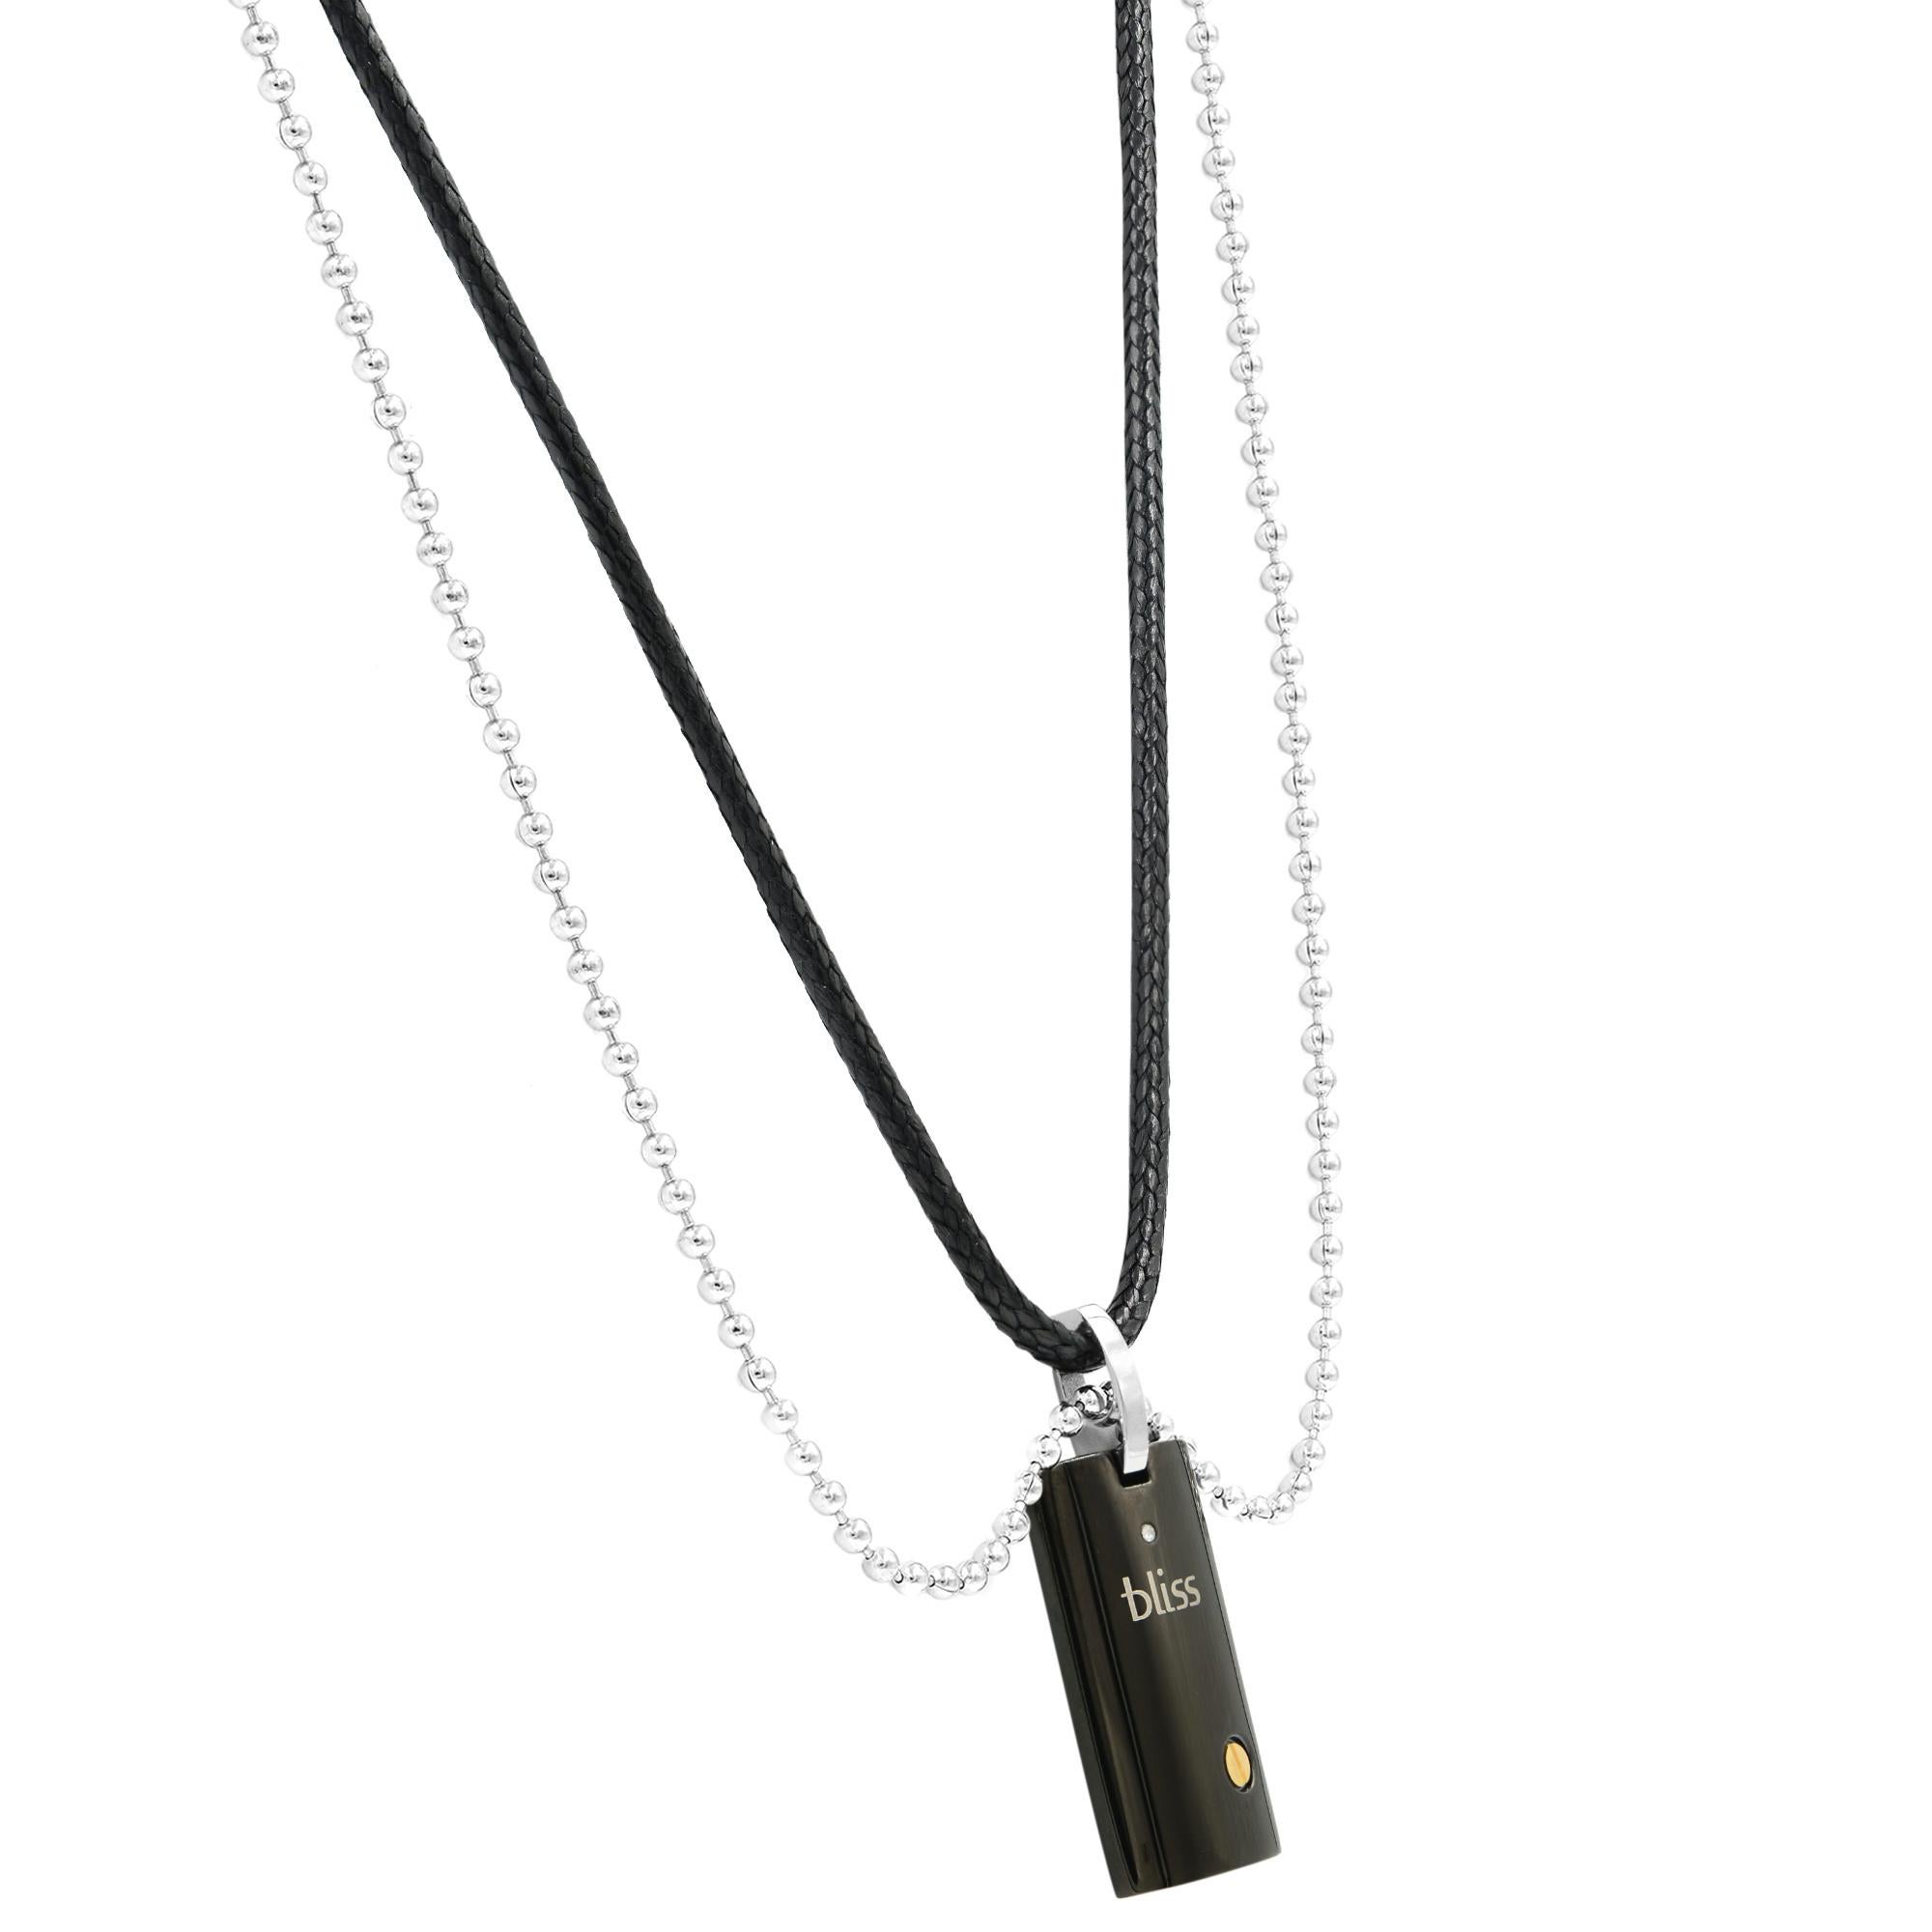 Round Cut Bliss by Damiani Uomo Diamond Pendant Necklace Black Steel 18K Yellow Gold For Sale